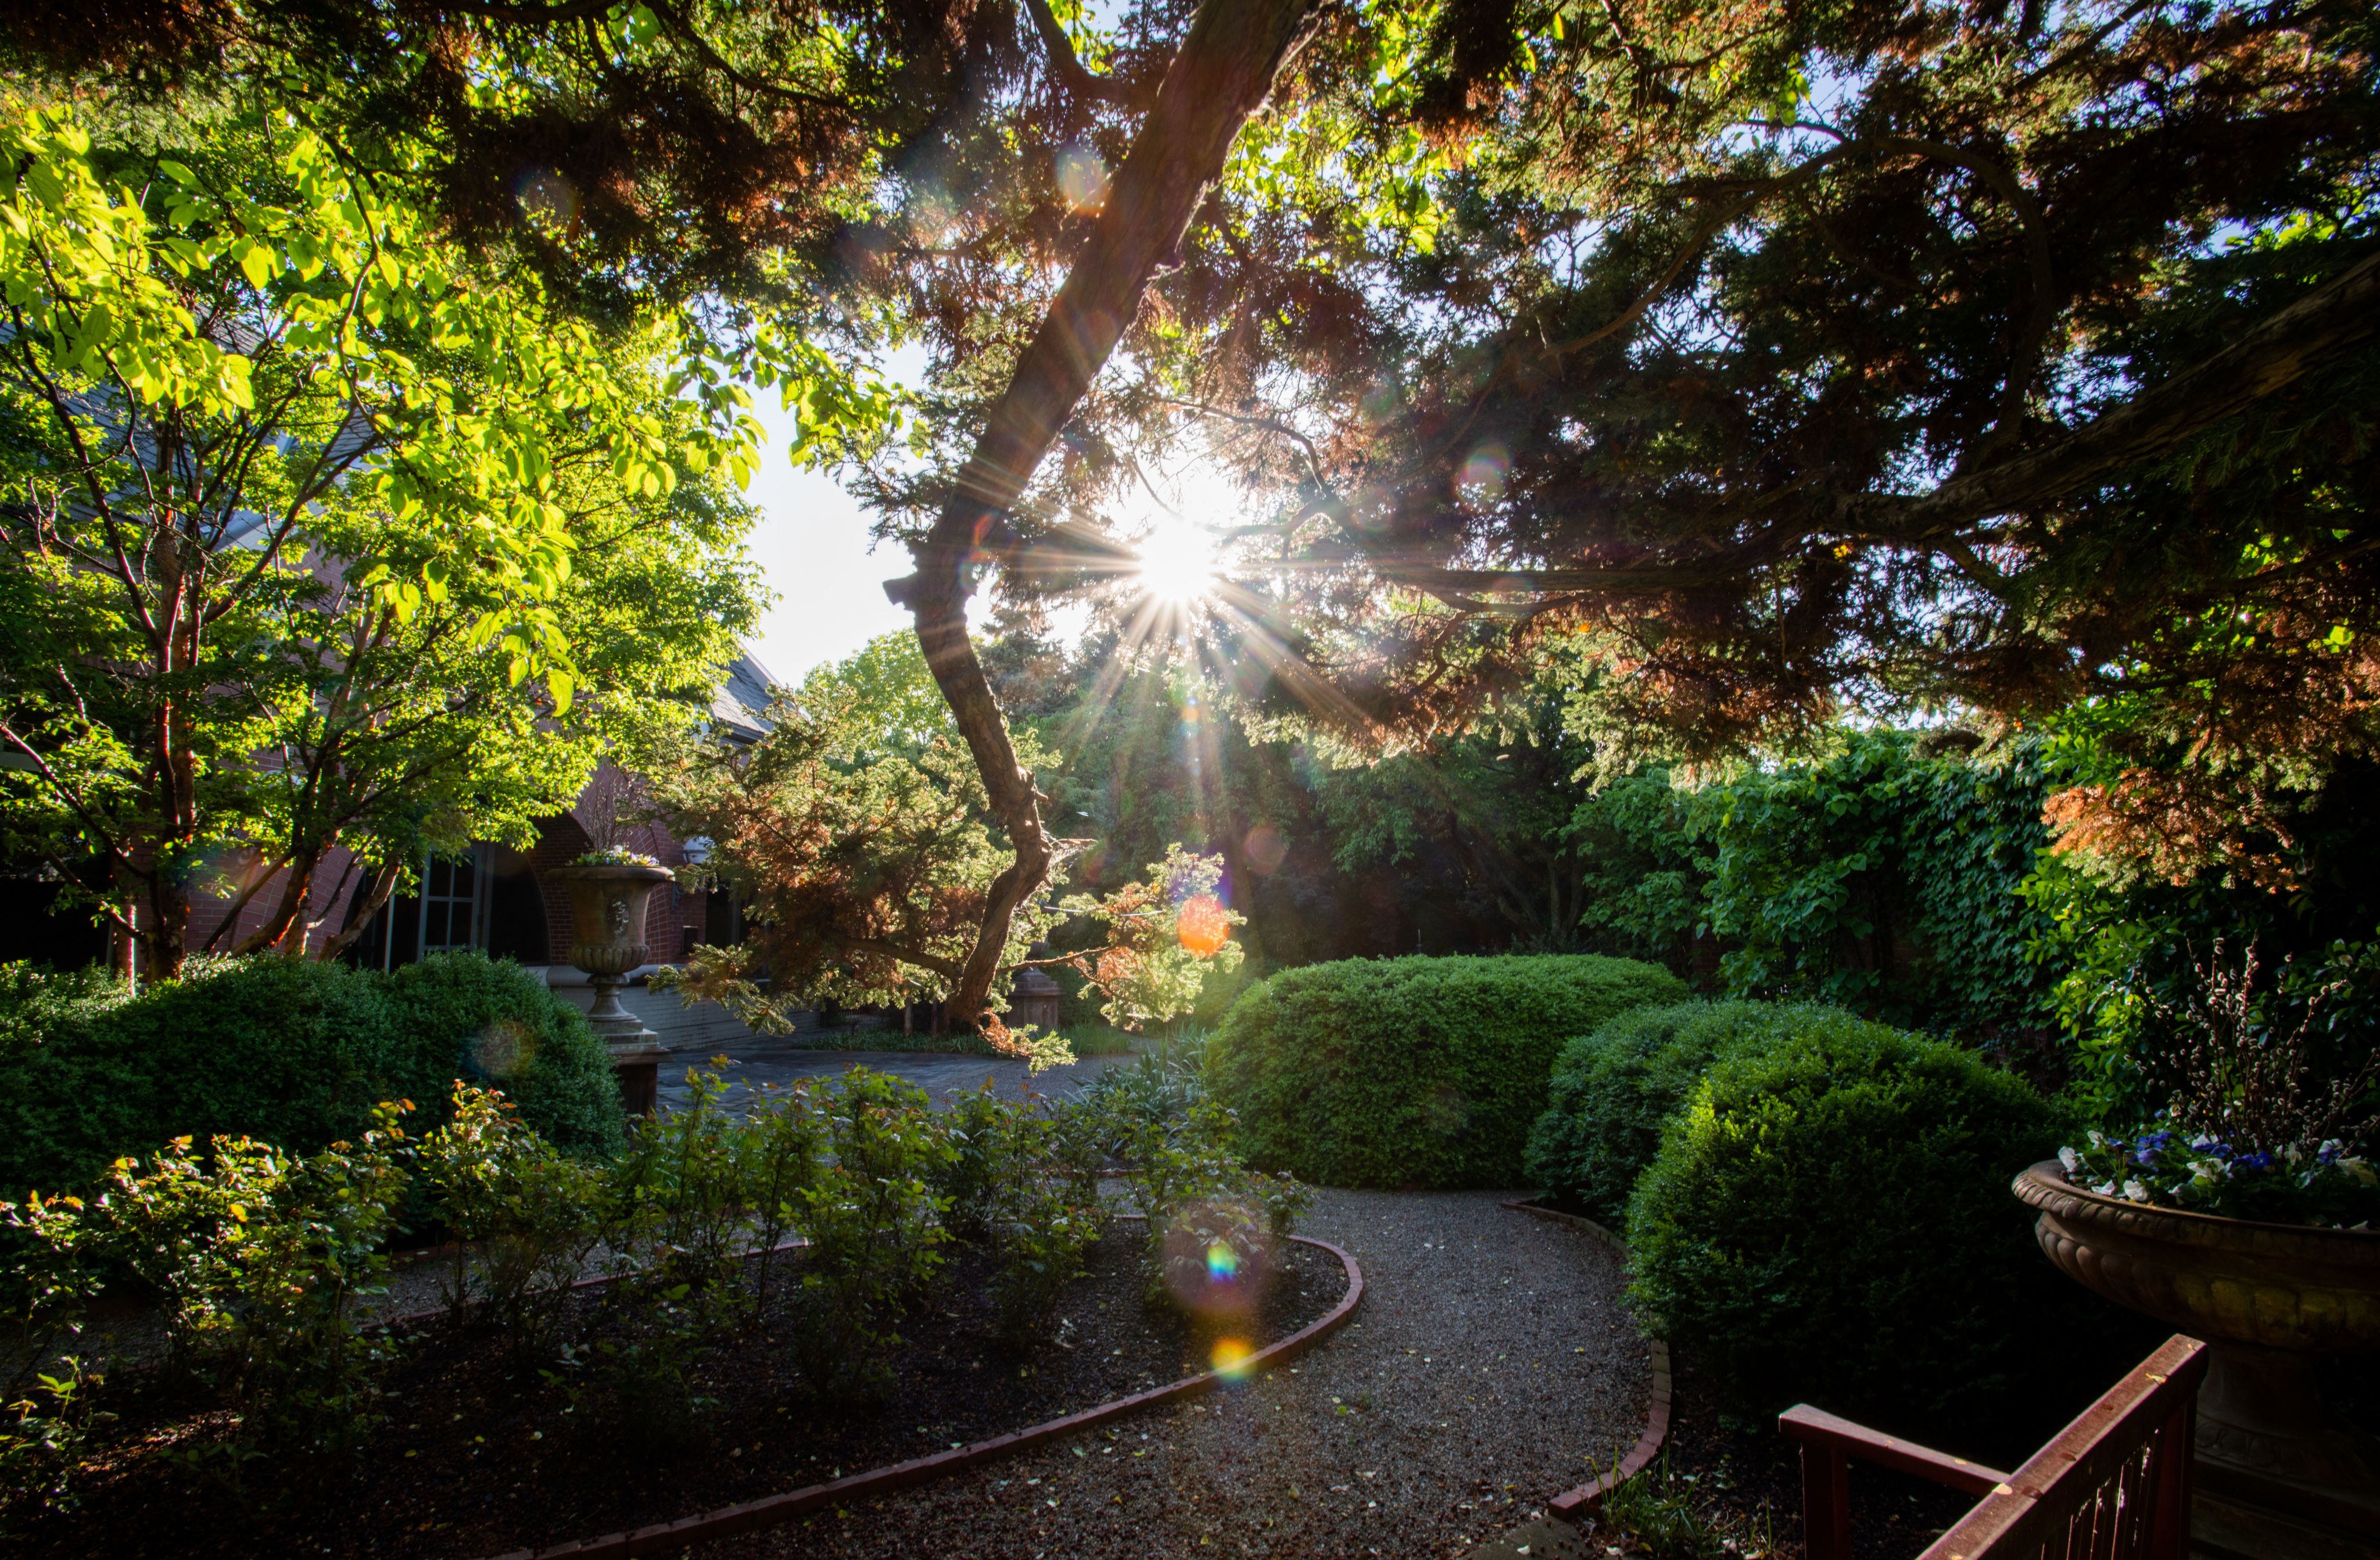 sun peeking through trees of a campus garden with a winding path, lots of green bushes